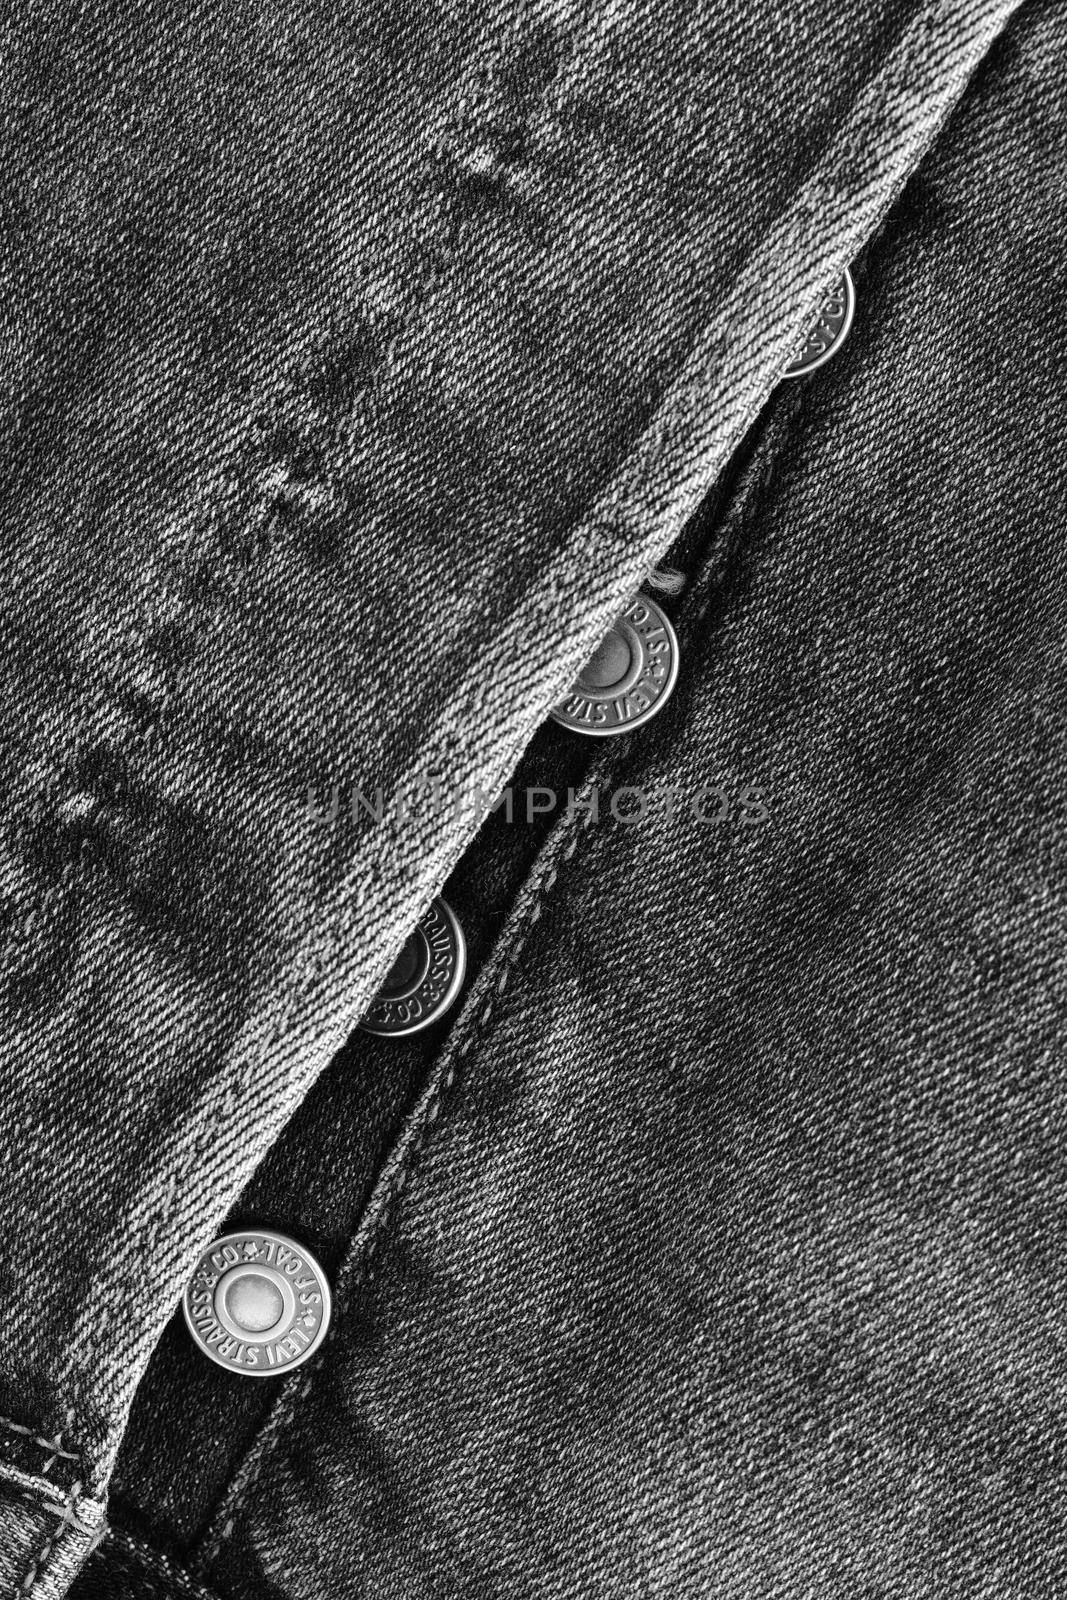 Close up of the details of new LEVI'S 501 Jeans. Buttons and seams close-up. Classic jeans model. LEVI'S is a brand name of Levi Strauss and Co, founded in 1853. 31.12.2021, Rostov, Russia by EvgeniyQW